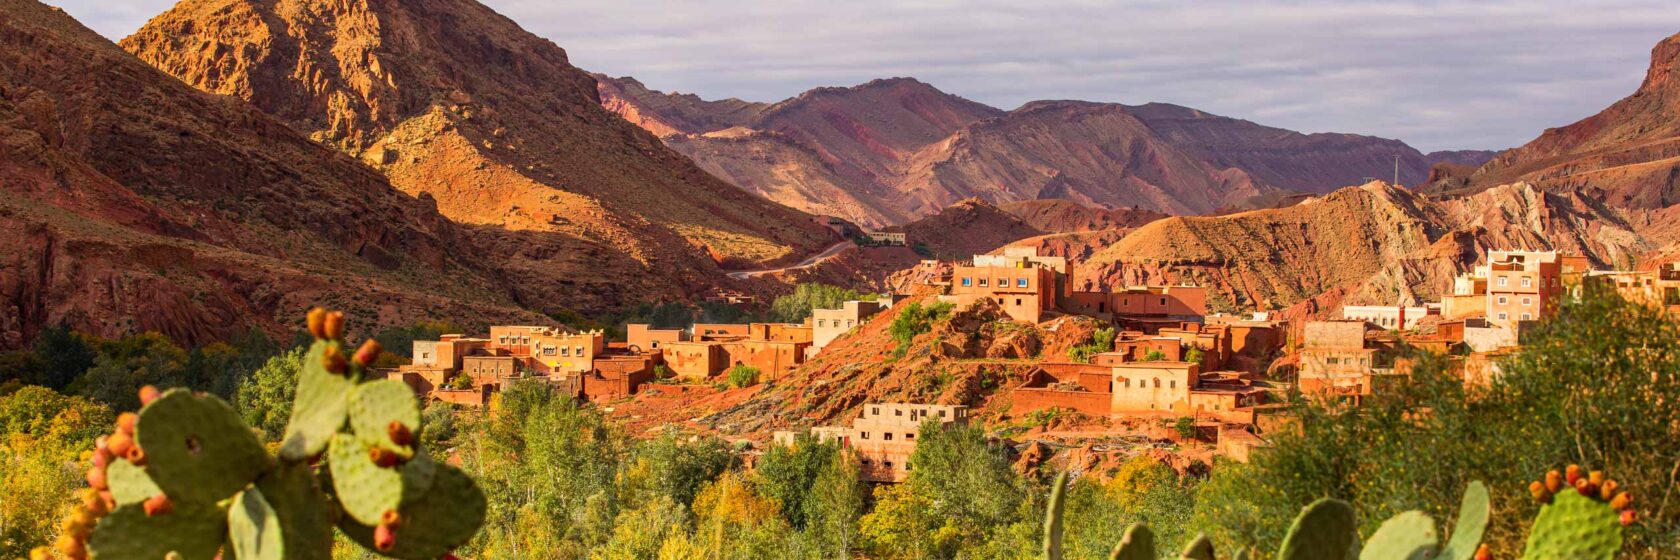 Dramatic scenery in High Atlas Mountains with cactus and trees in foreground and sprawling clay-brick village in background.